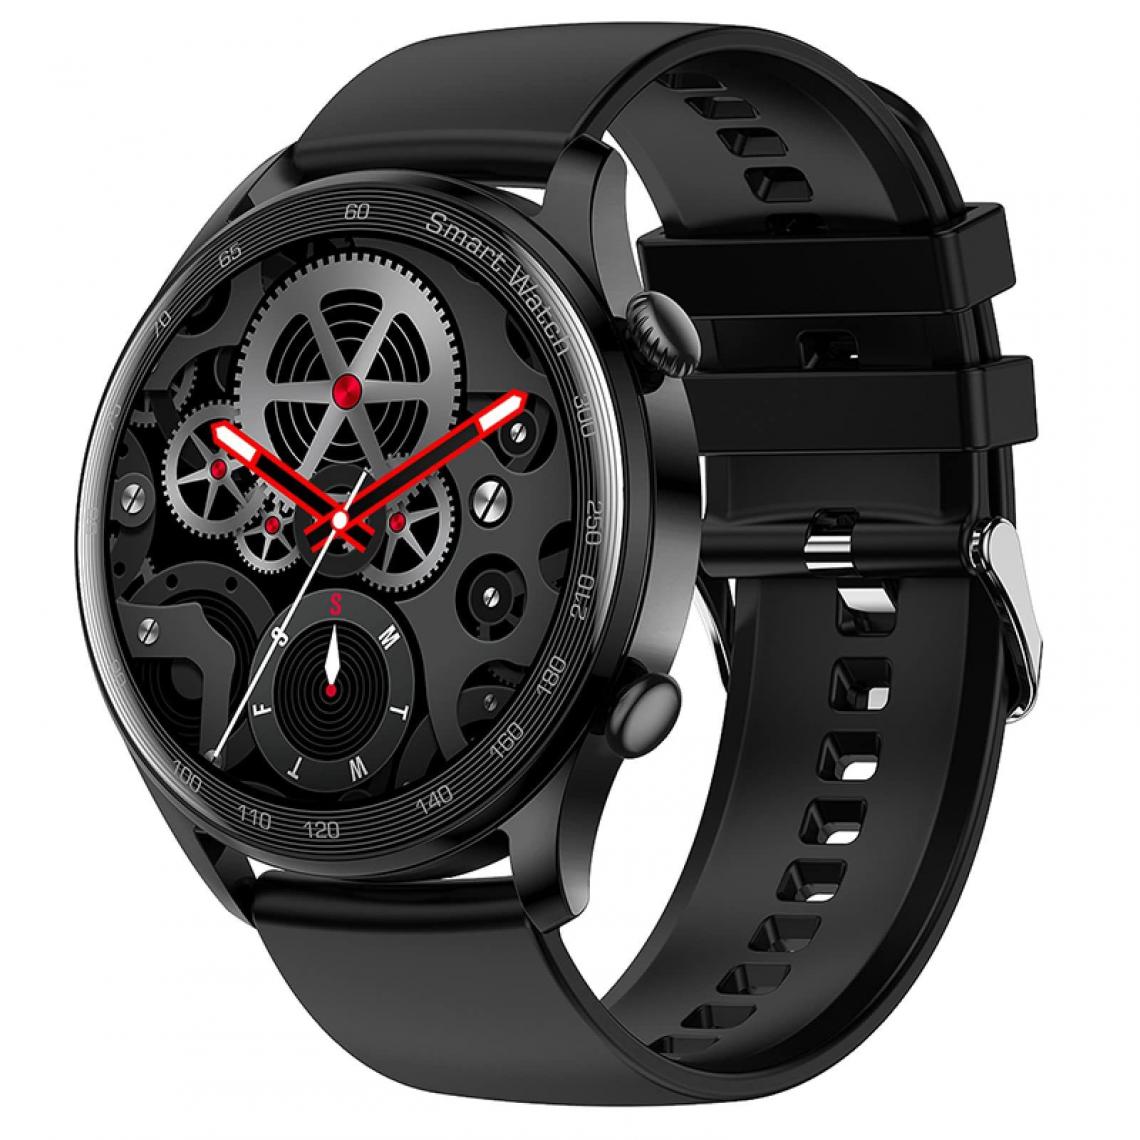 Chronotech Montres - Chronus HD Touch Smart Watch Bluetooth Call Sleep Monitoring Waterproof Fitness Tracker for Android IOS (Black) - Montre connectée